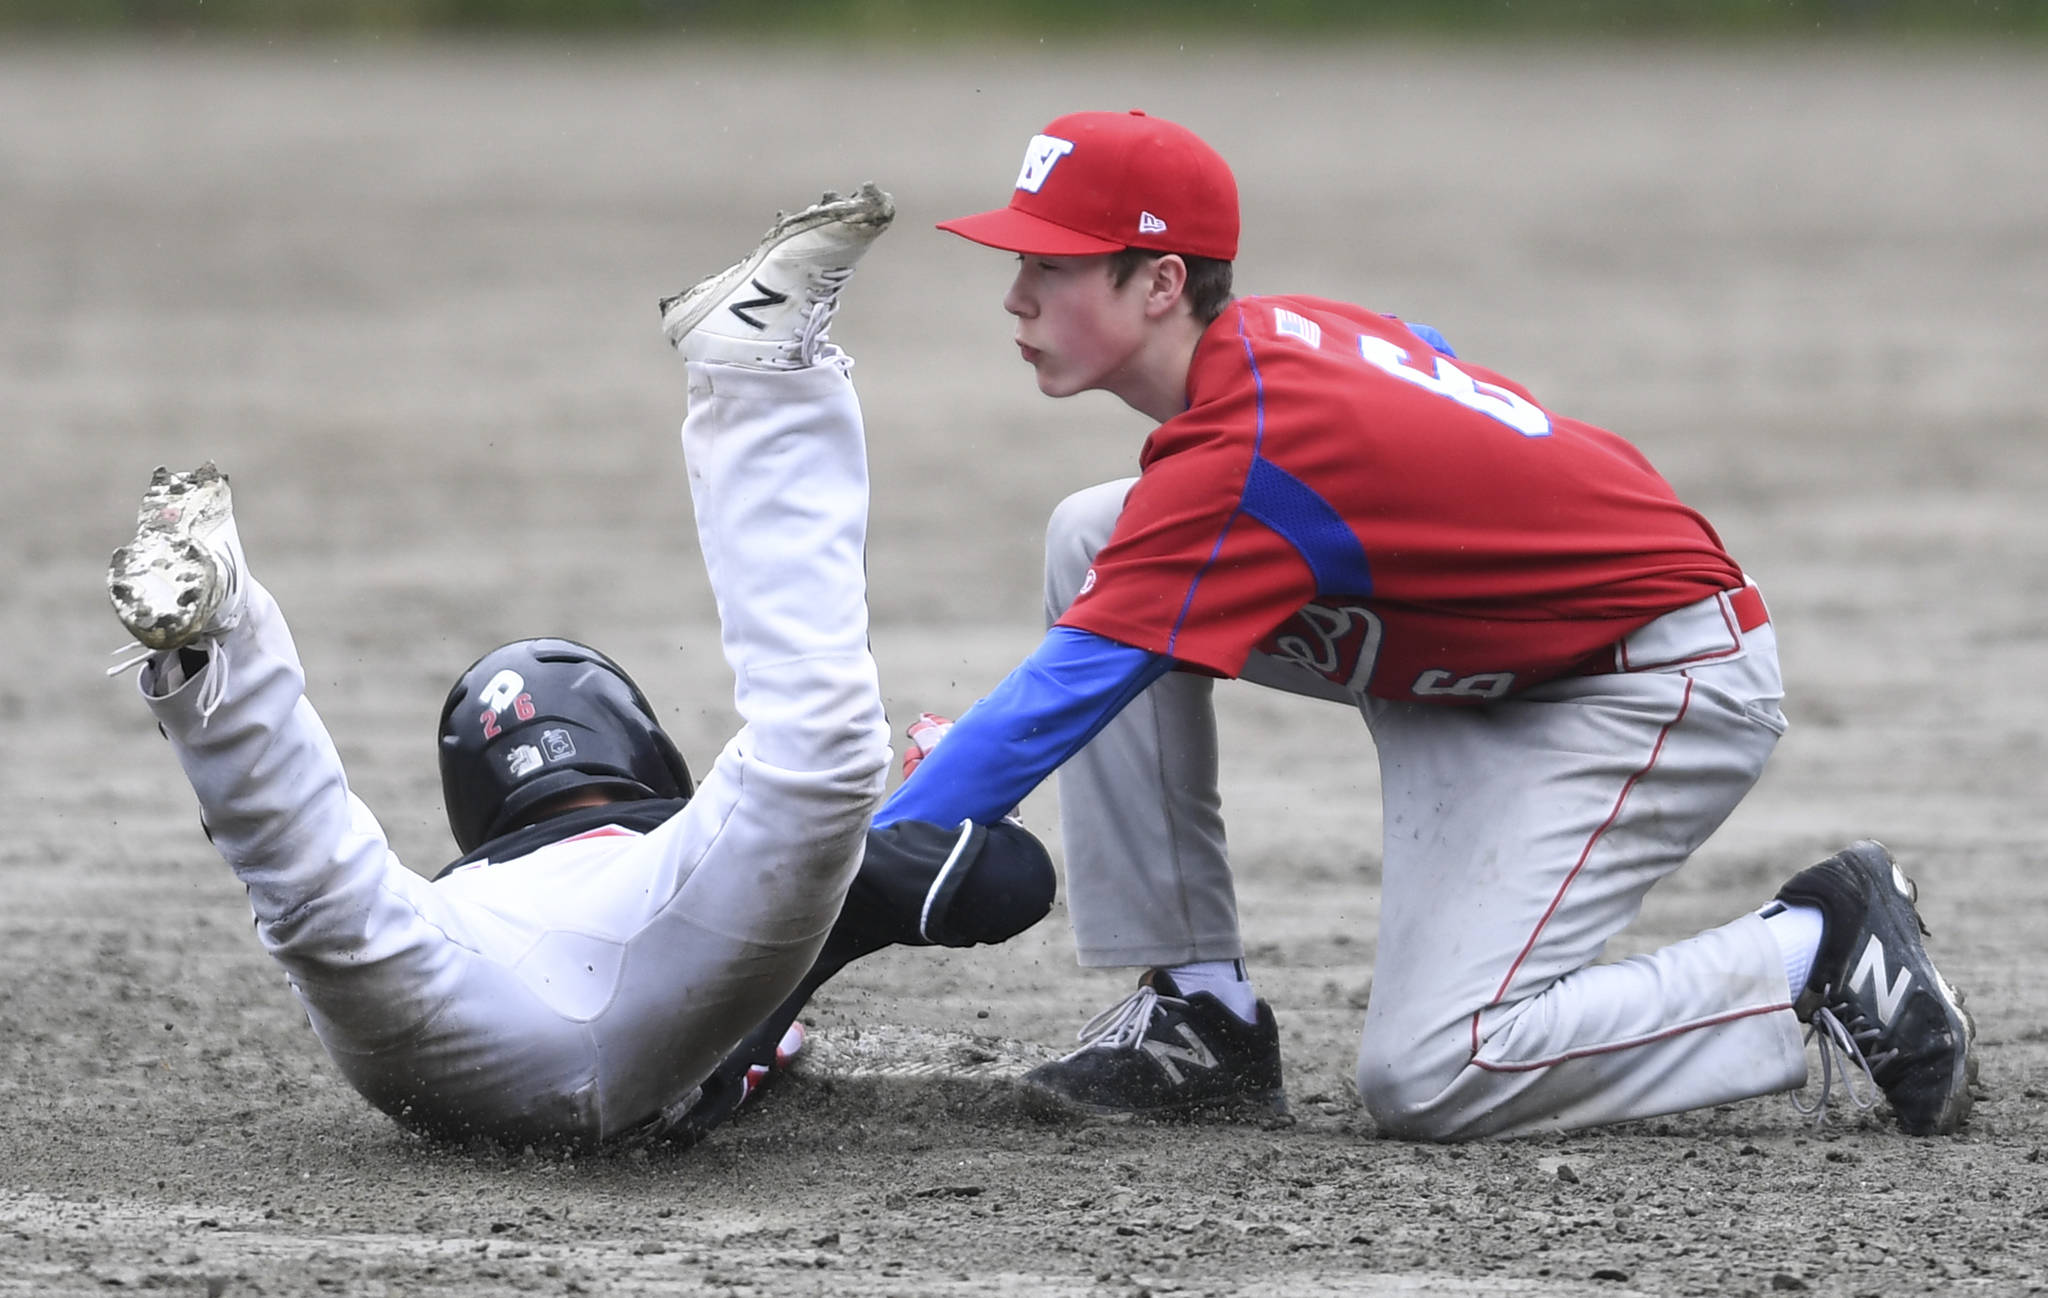 Juneau-Douglas’ Gaby Soto, left, is tagged out on an attempted steal by Sitka’s Kyler Brenton during the Region V Baseball Championship at Adair-Kennedy Memorial Park on Thursday, May 23, 2019. JDHS won 6-5. (Michael Penn | Juneau Empire)